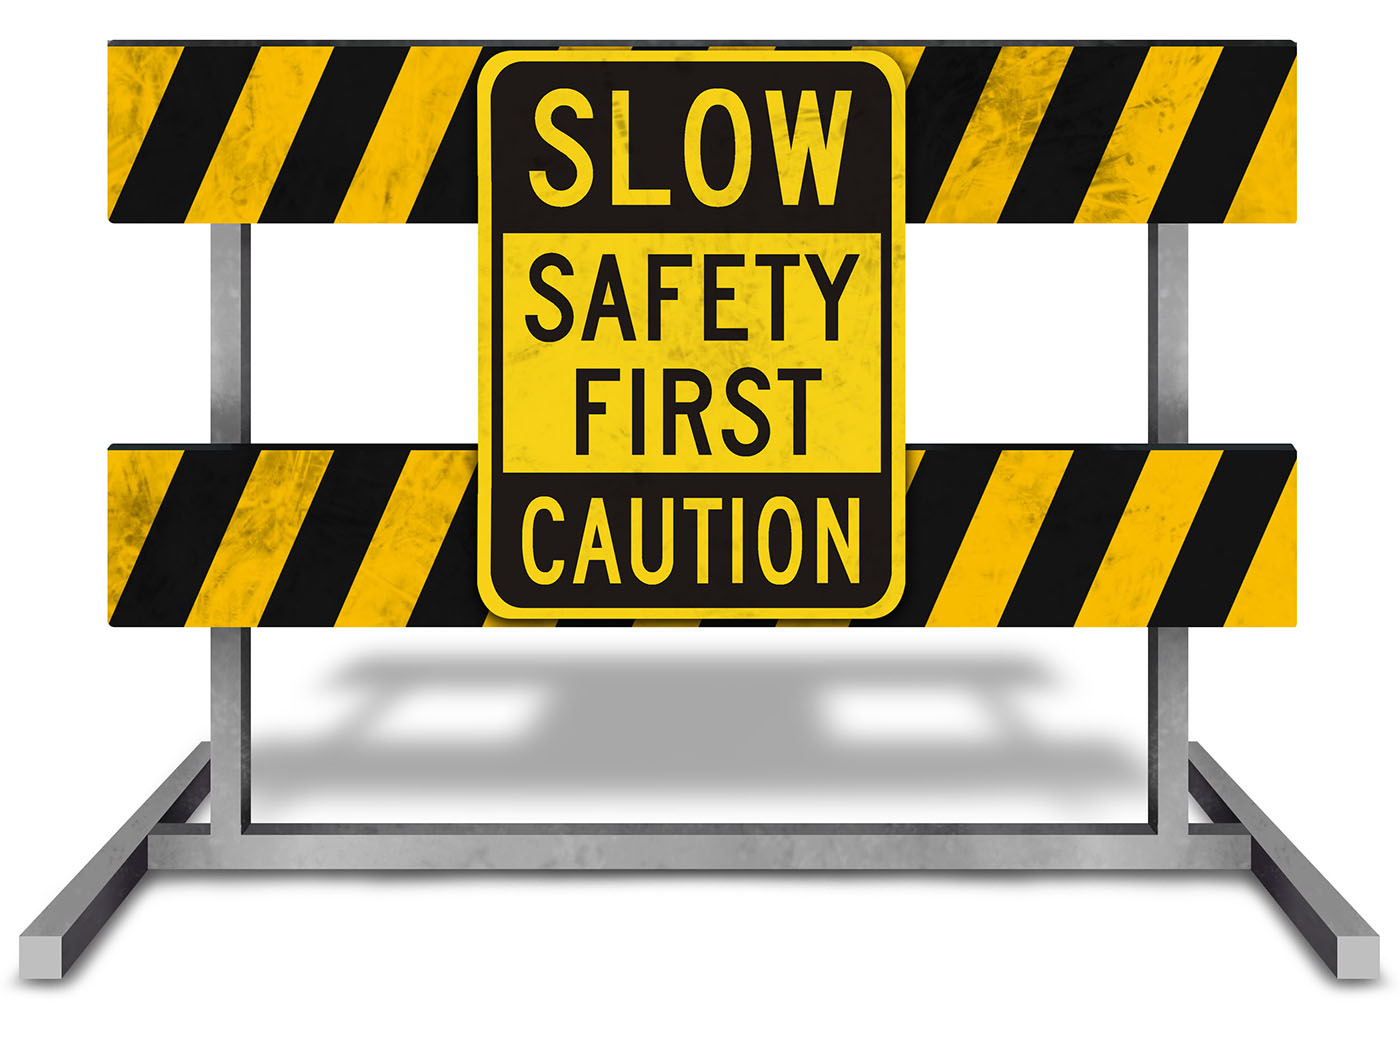 Slow Down in Road Construction Areas! OSHA Safety Manuals